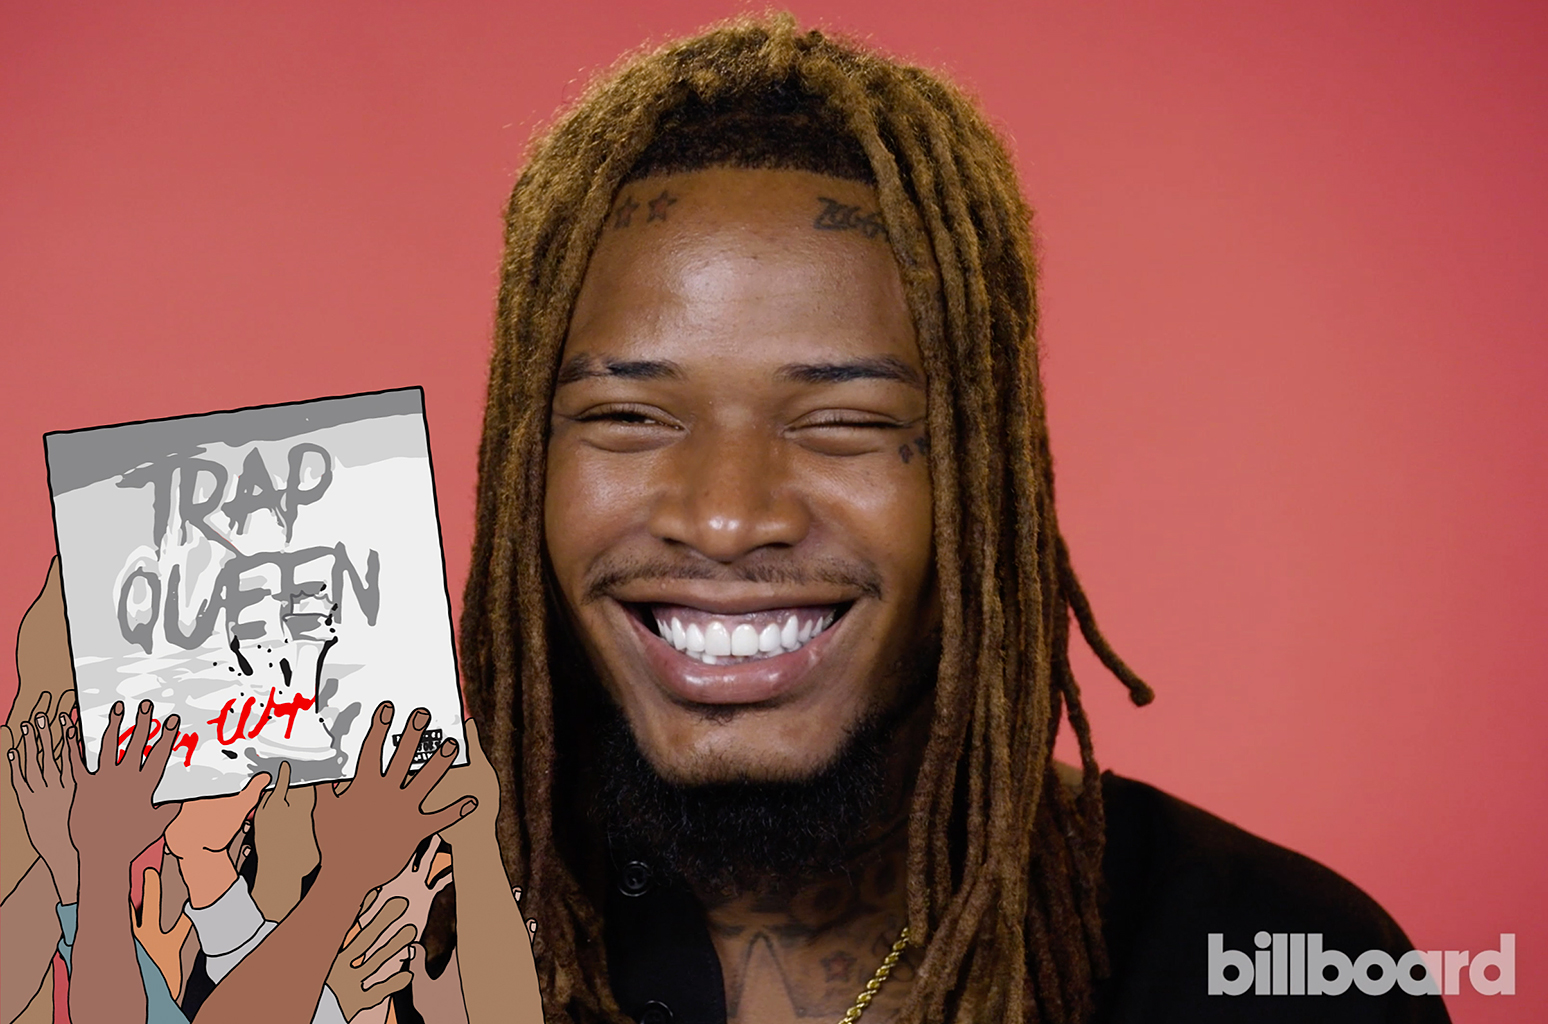 Fetty Wap Recalls the Cold Winter Day When He Sat on the Floor Writing 'Trap Queen' - www.billboard.com - New Jersey